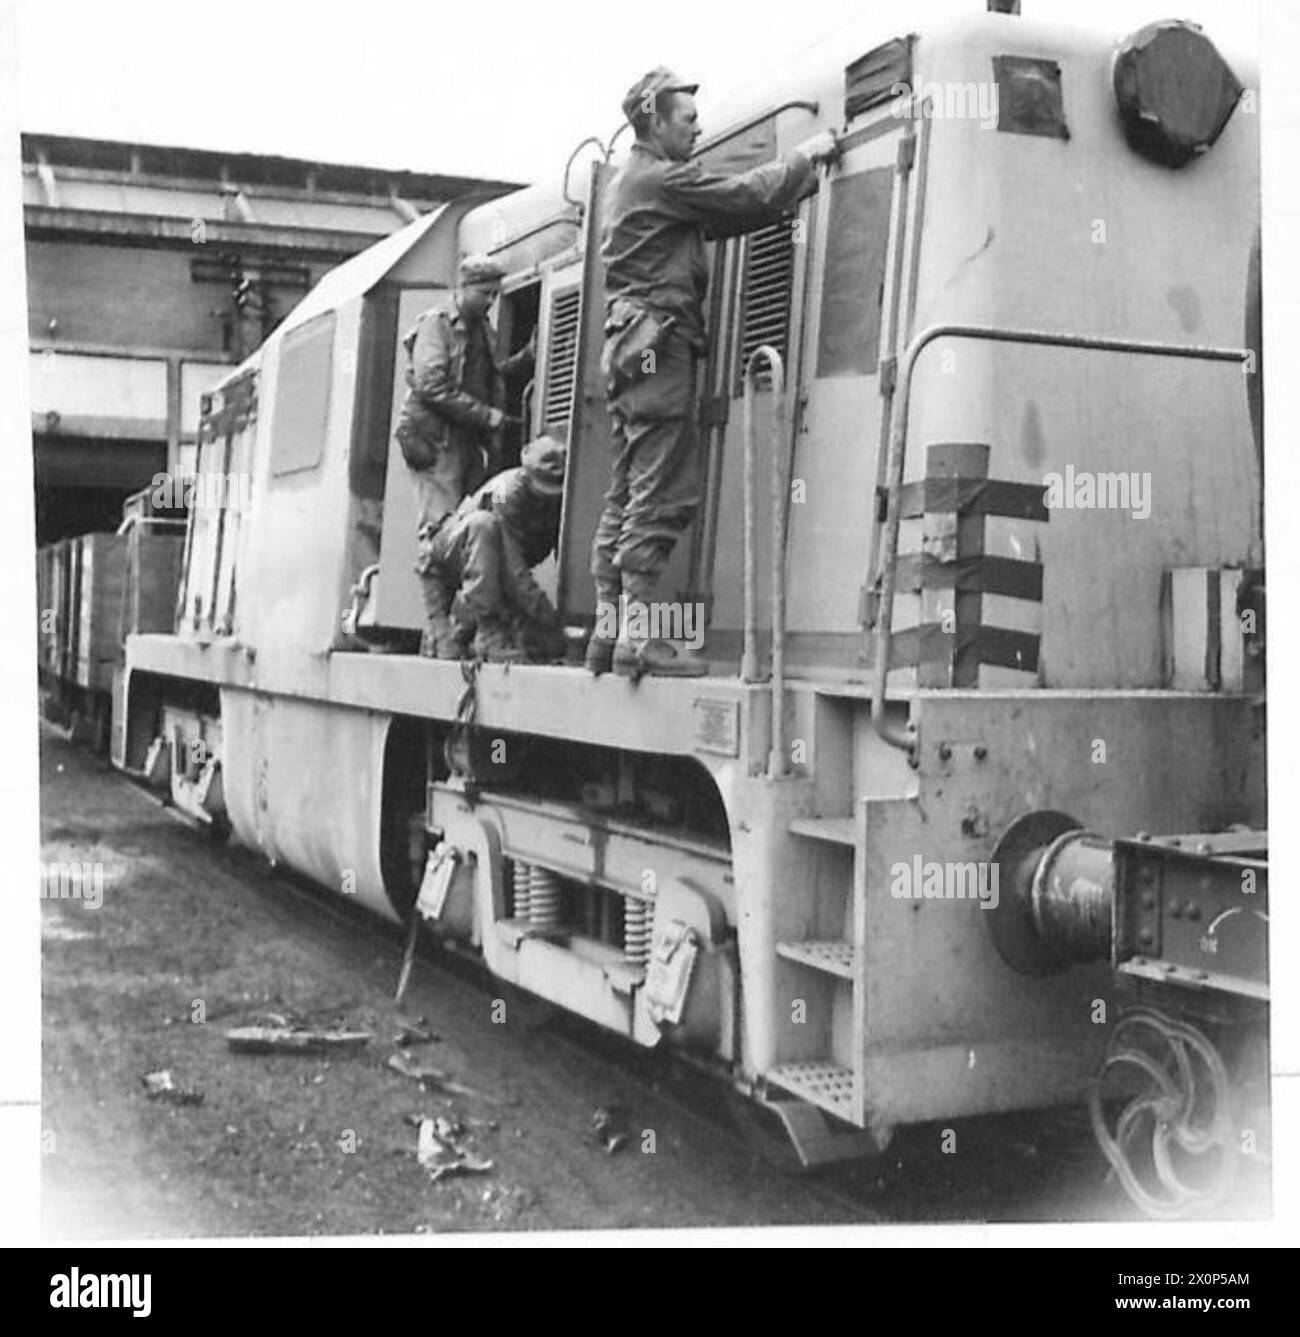 PHOTOGRAPHS OF PREFABRICATED PORT, ETC. - A.R.P. on Diesel loco Photographic negative , British Army, 21st Army Group Stock Photo